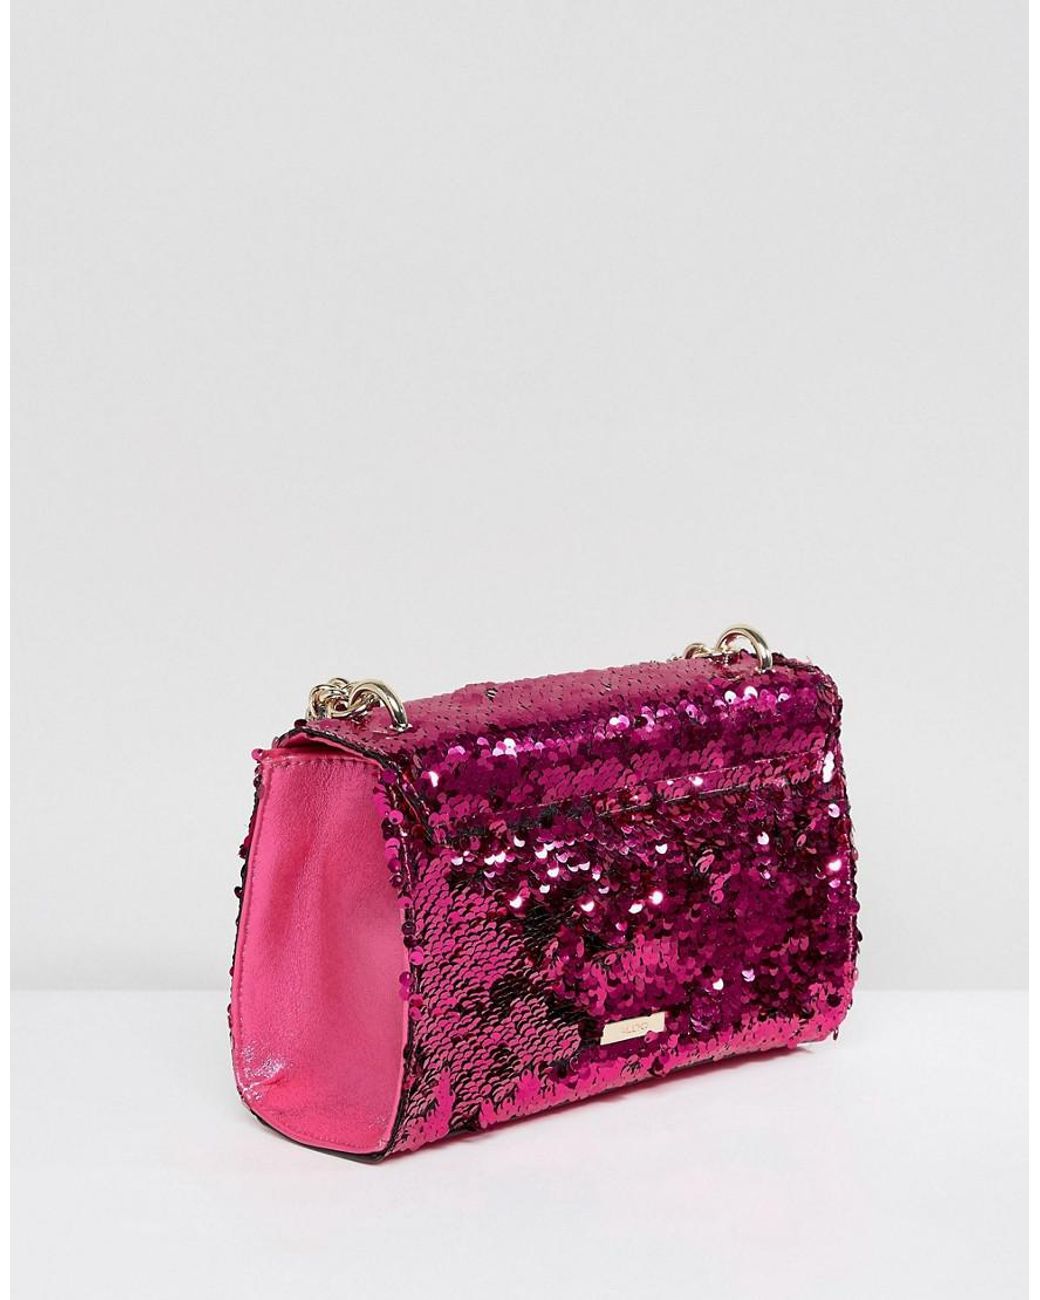 Aldo Mini Crossbody Bag with Embellished Bow in Pink-Green